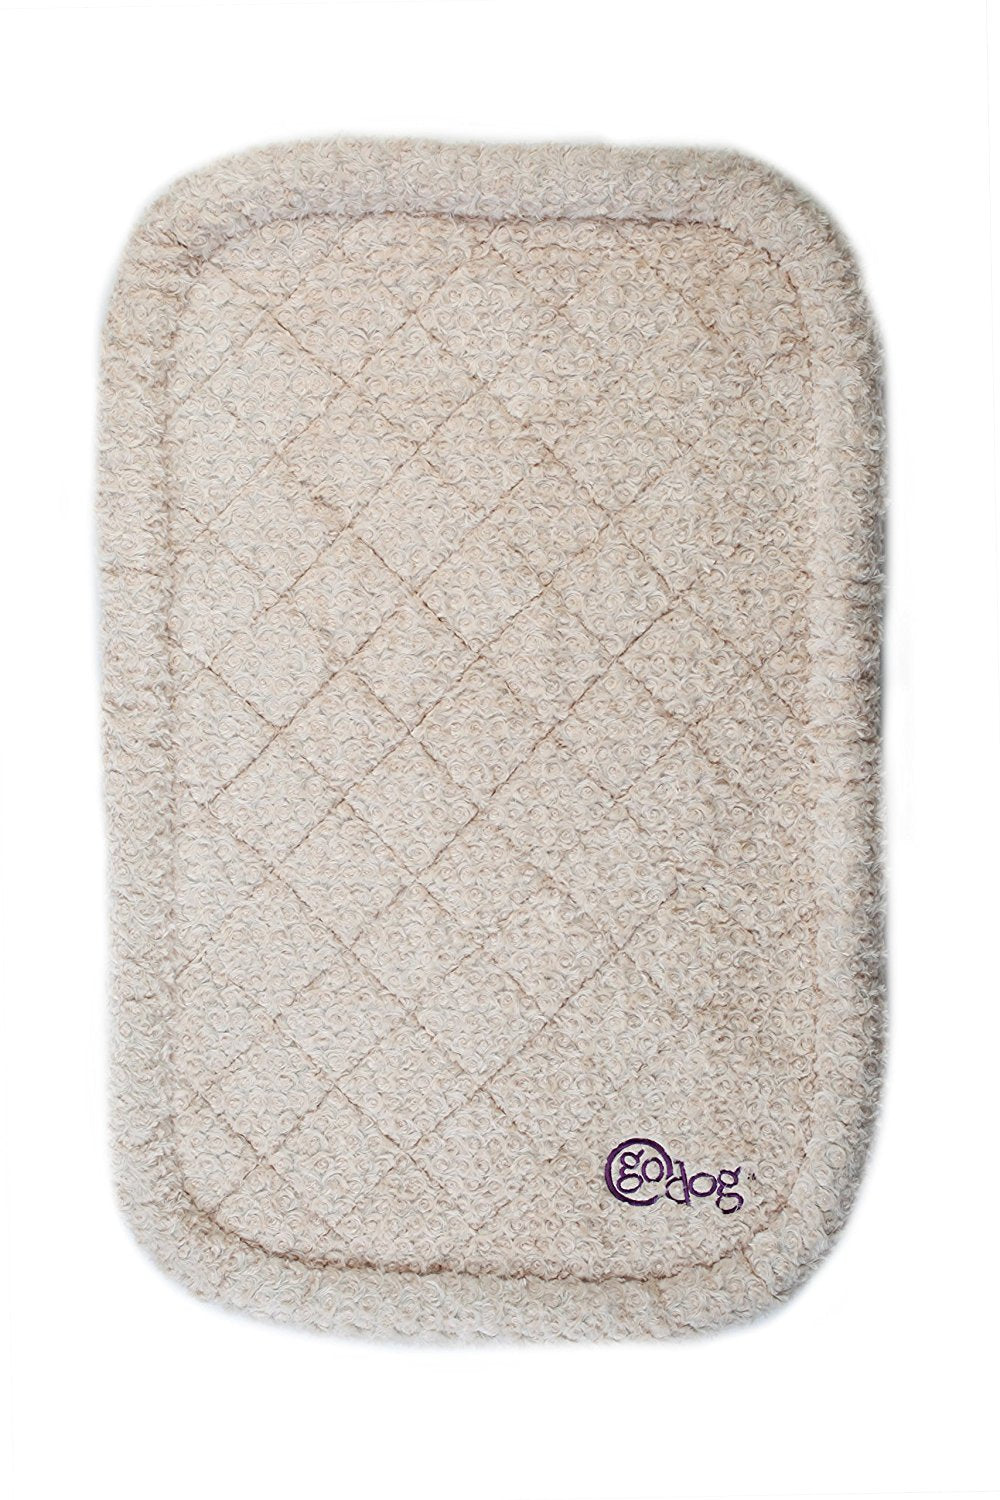 goDog BedZzz Bubble Bolster with Chew Guard Technology, Large Shag Tan